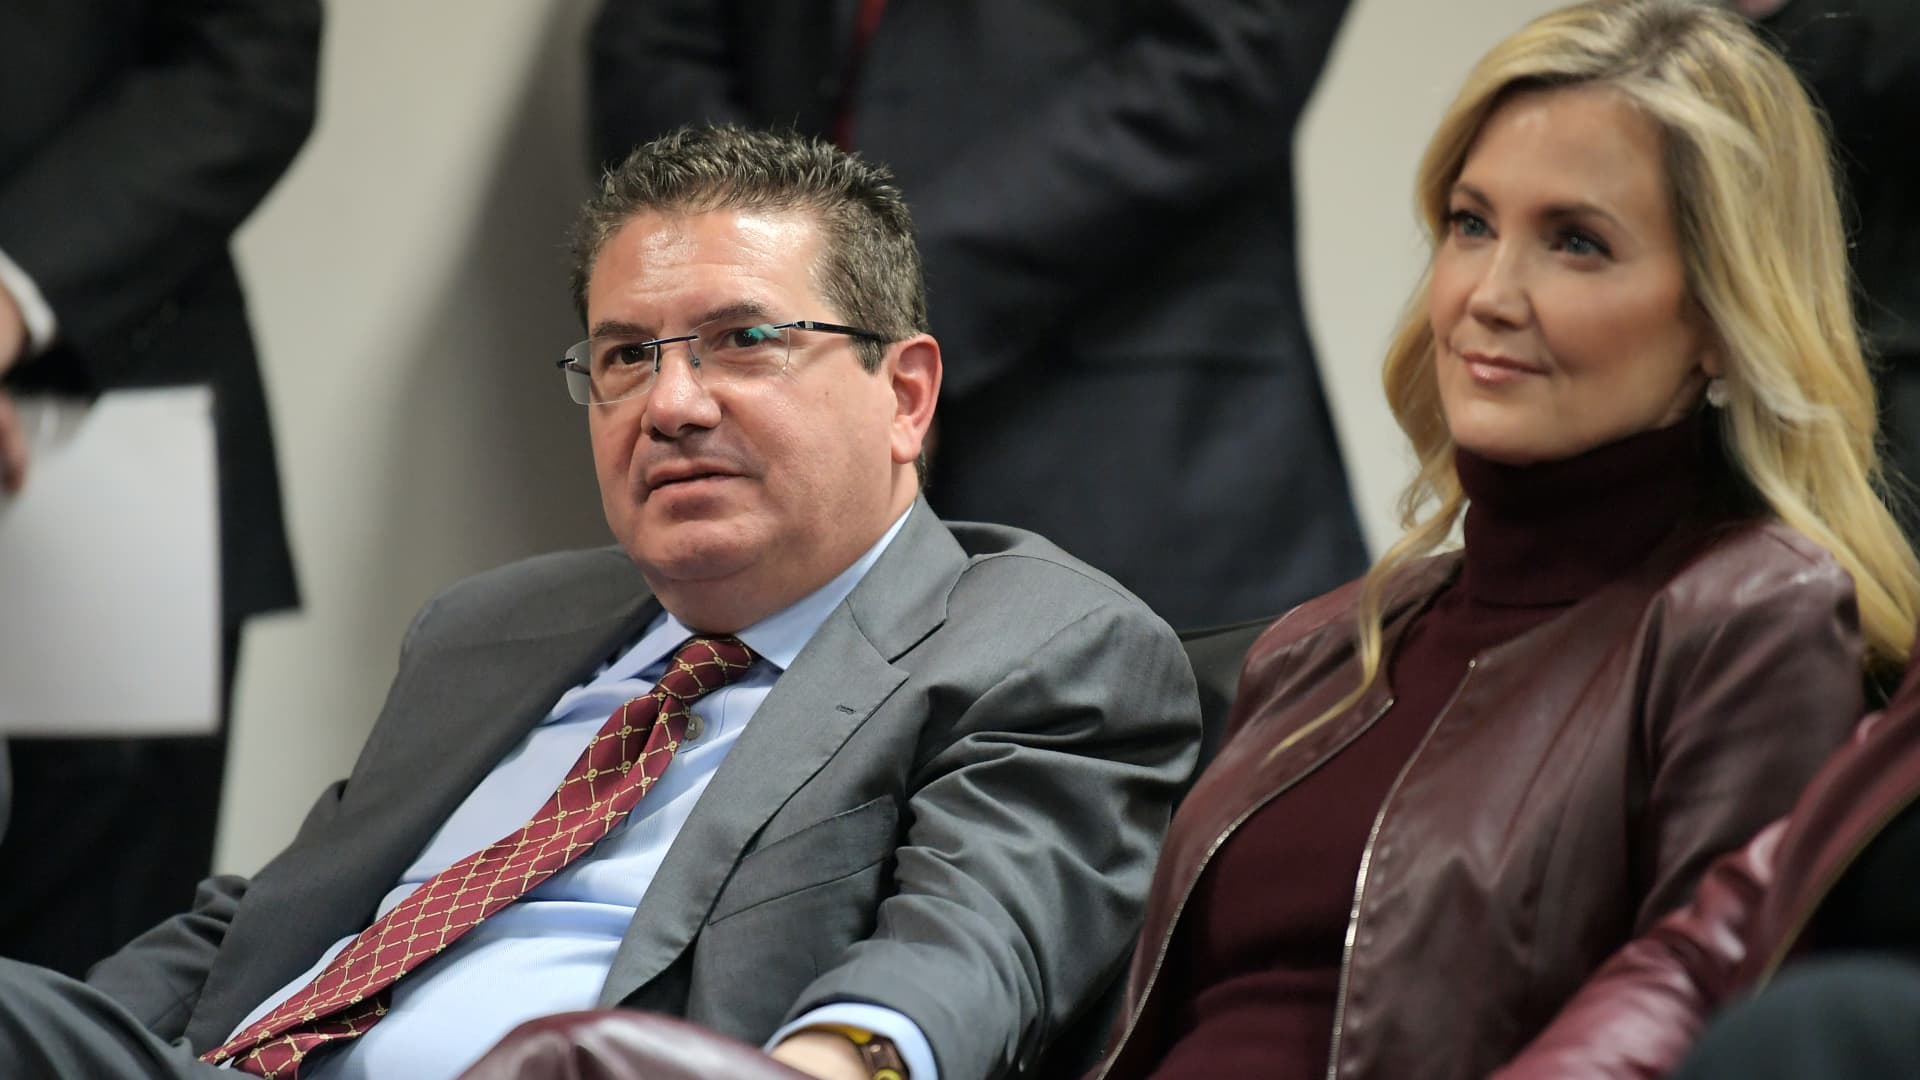 Washington Redskins owner Dan Snyder, left, sits with his wife Tanya Snyder sin the audience as Ron Rivera is introduced as the Washington Redskins new had coach at a Redskins Park press conference in Ashburn, VA on January 2, 2020.